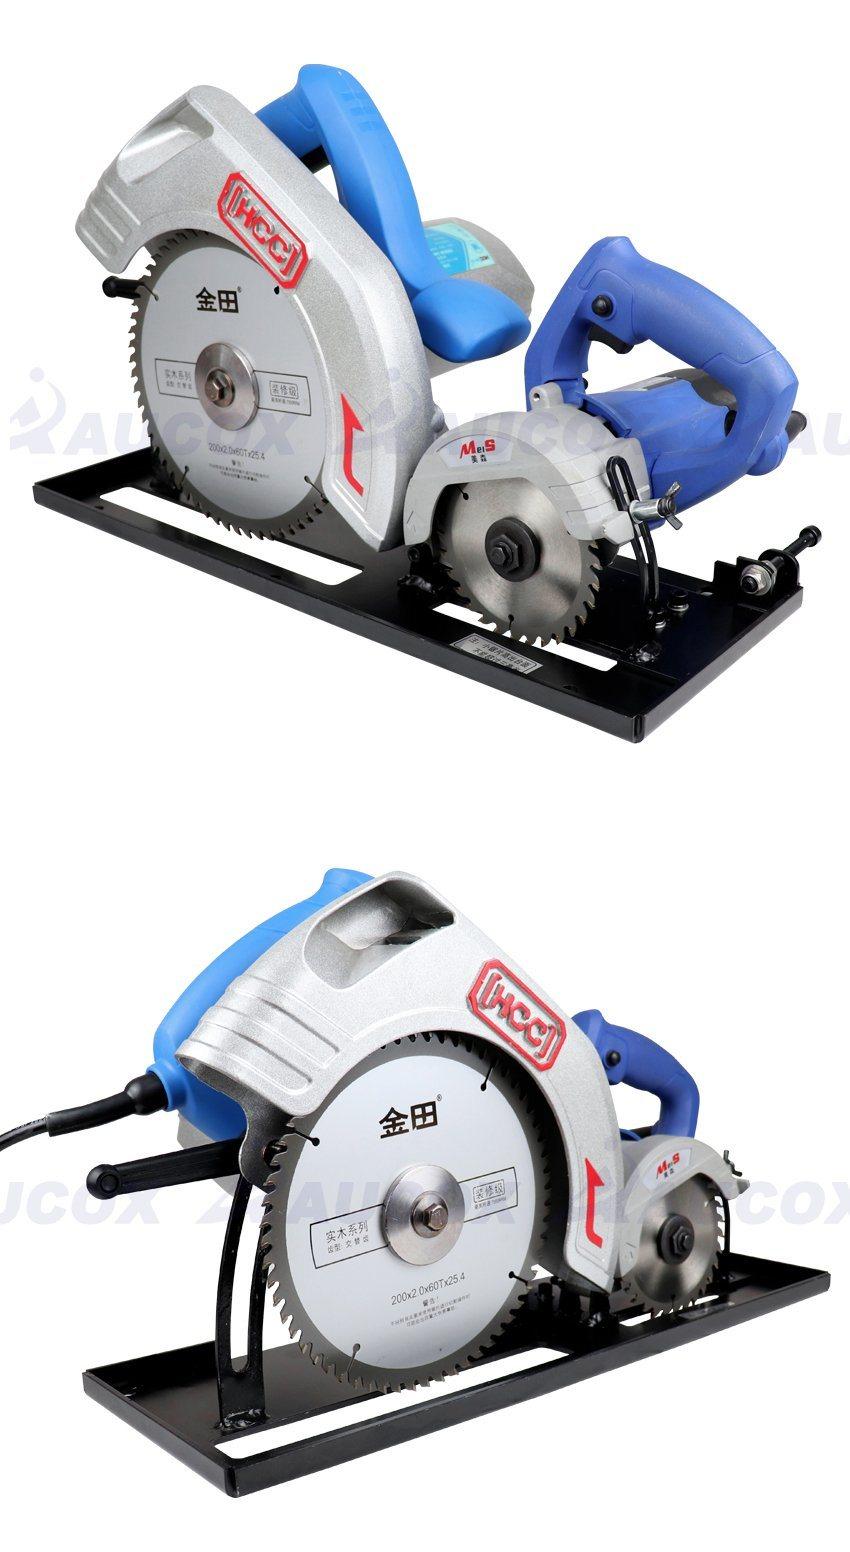 Mj09 Table Saw Machine for Woodworking Furniture